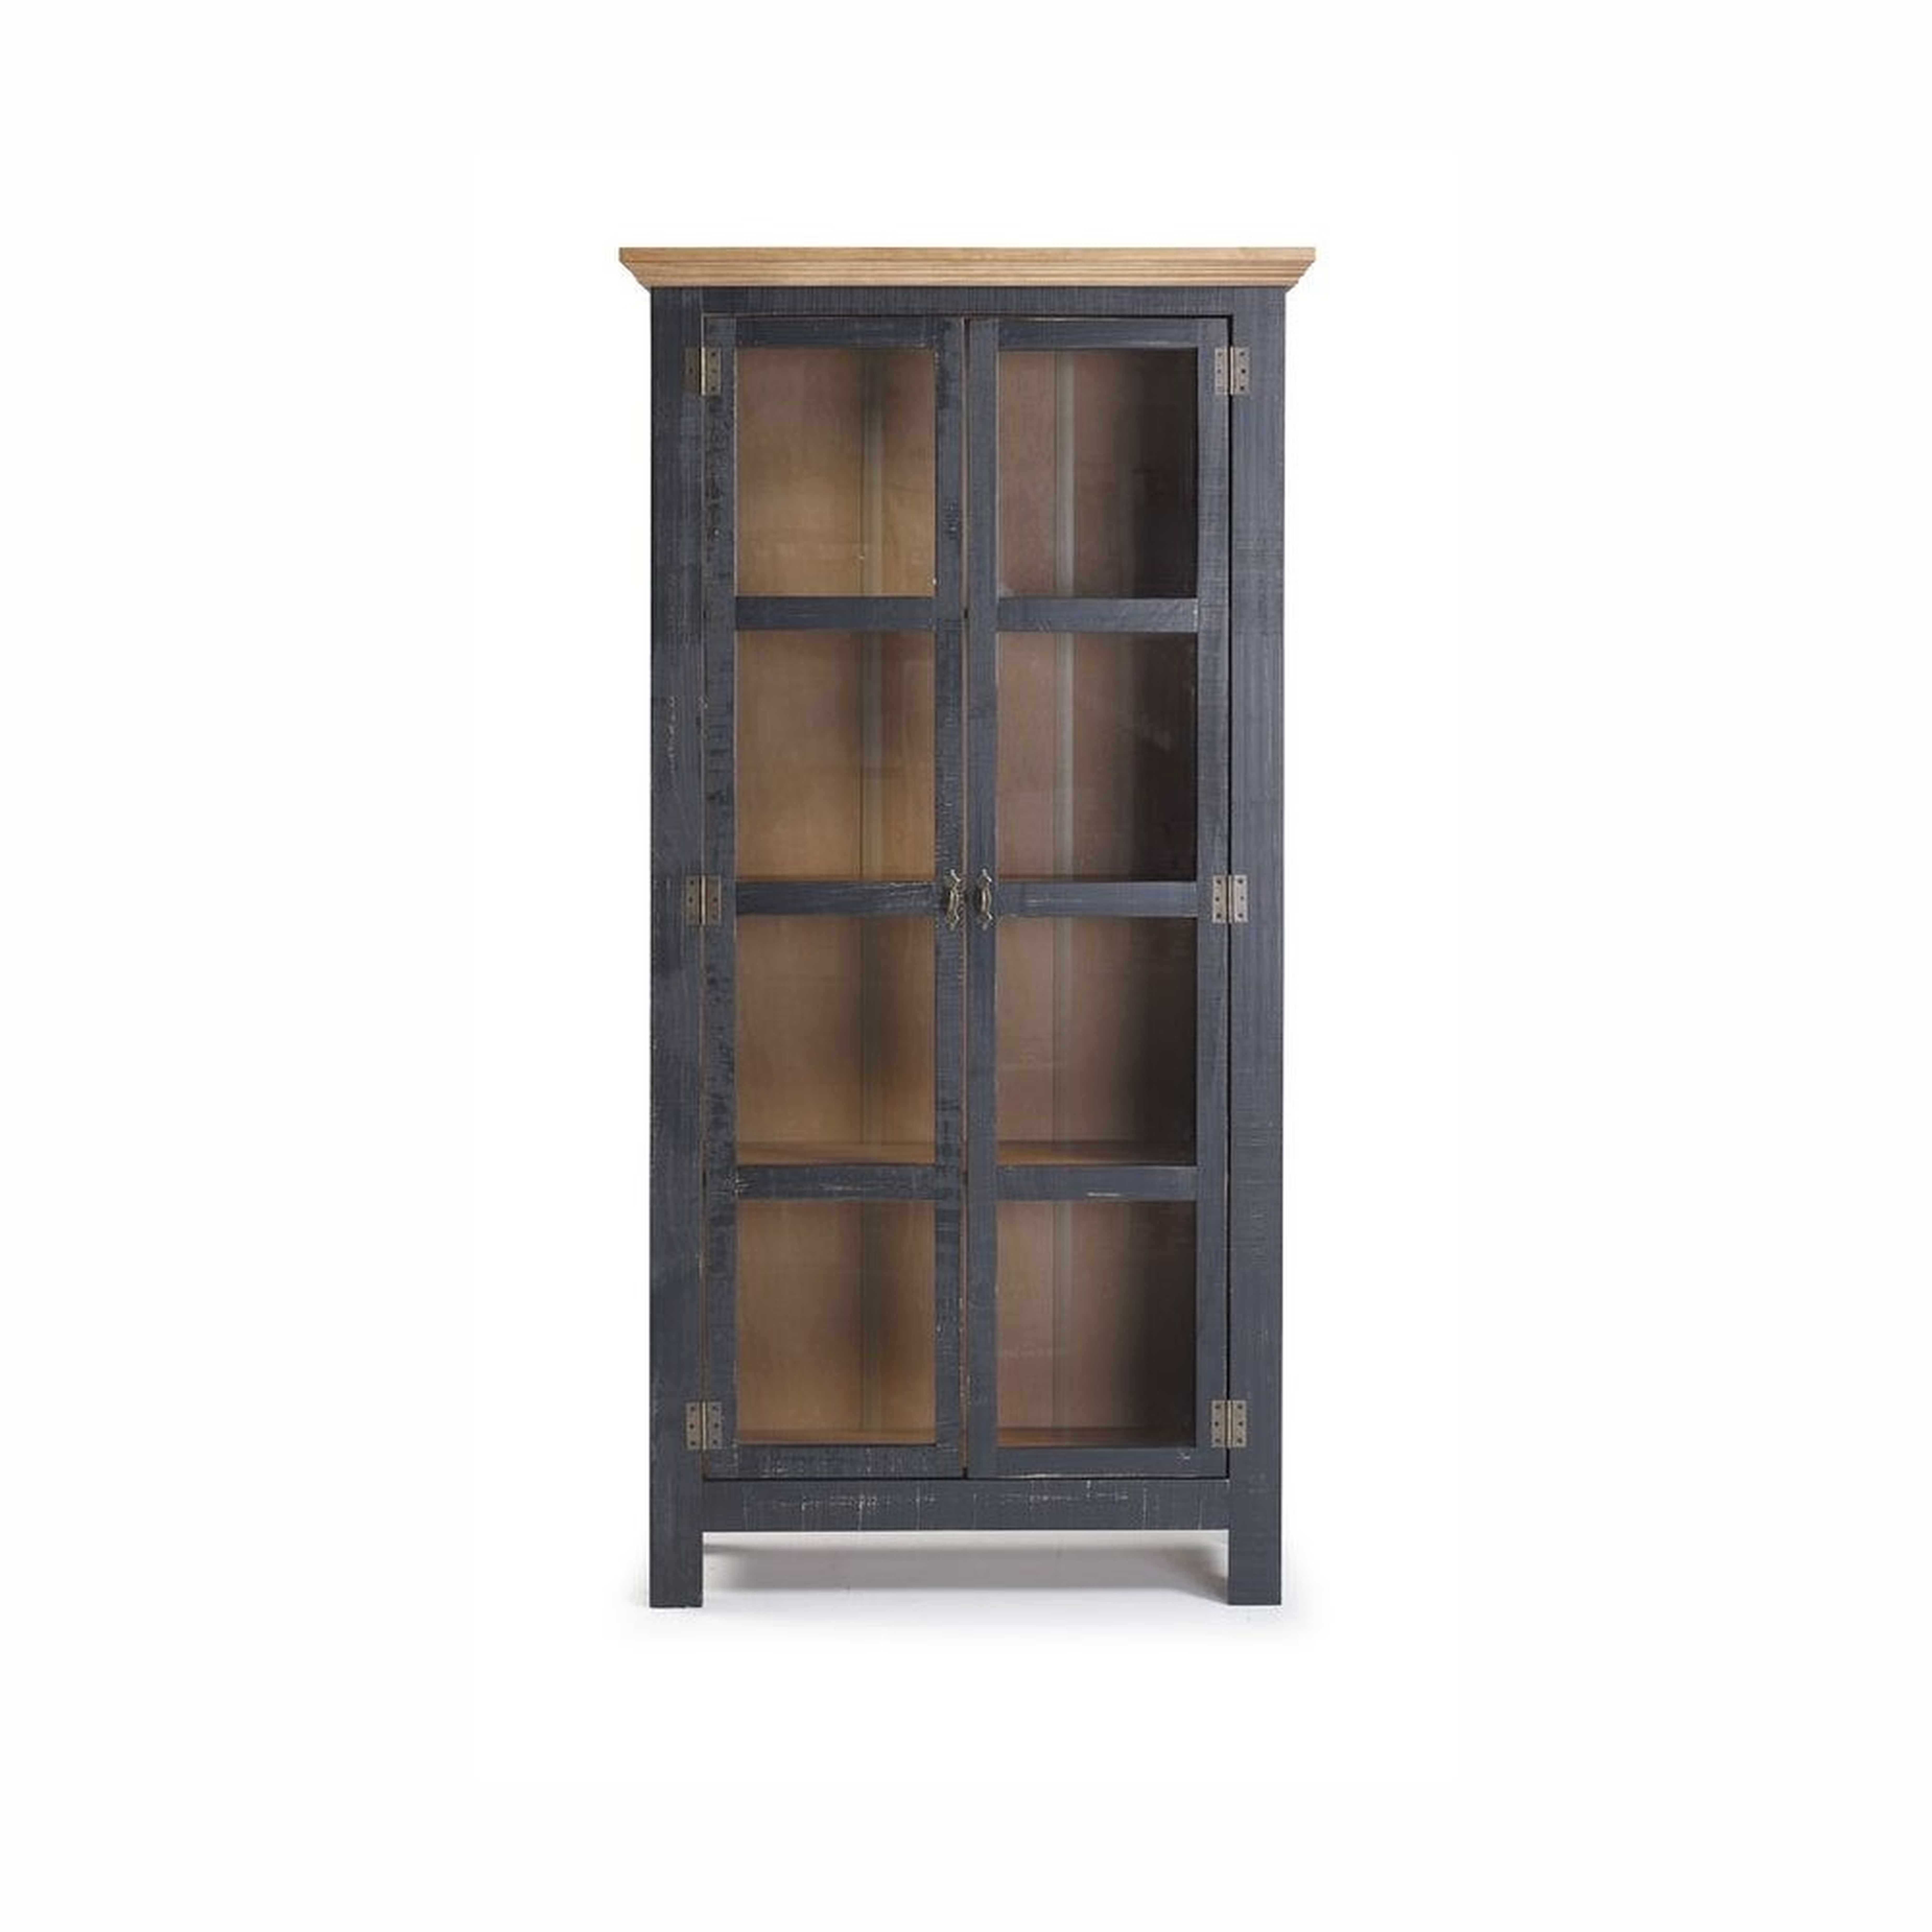 The Beach House Design Accent Cabinet Glass Doors - Overstock